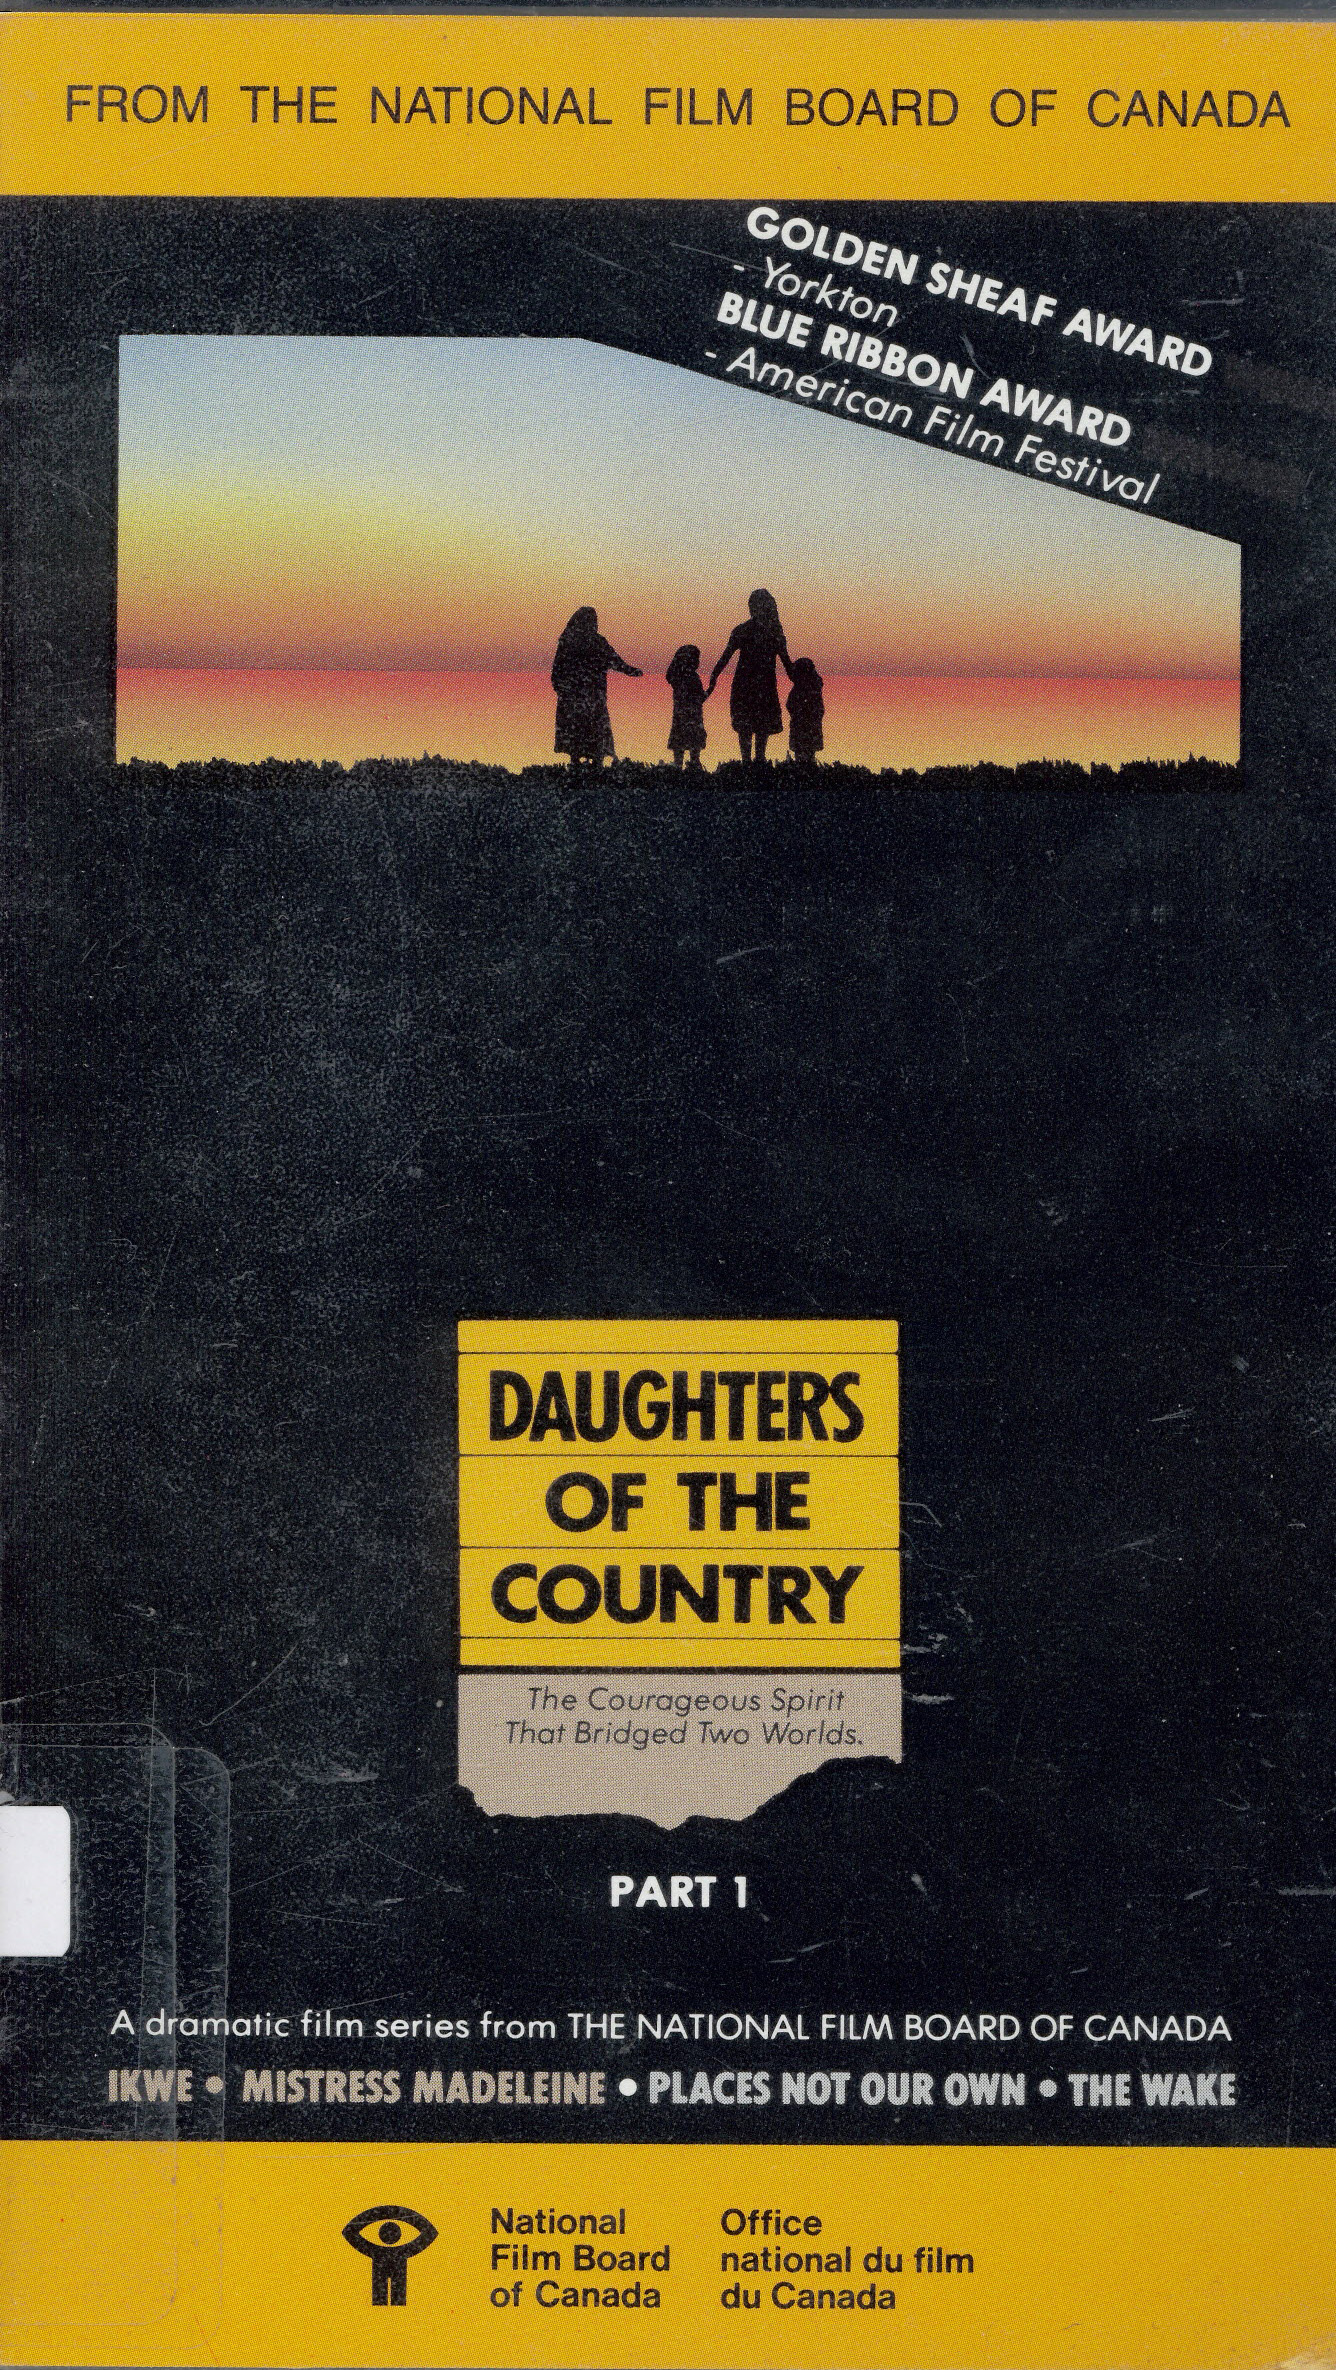 Daughters of the country